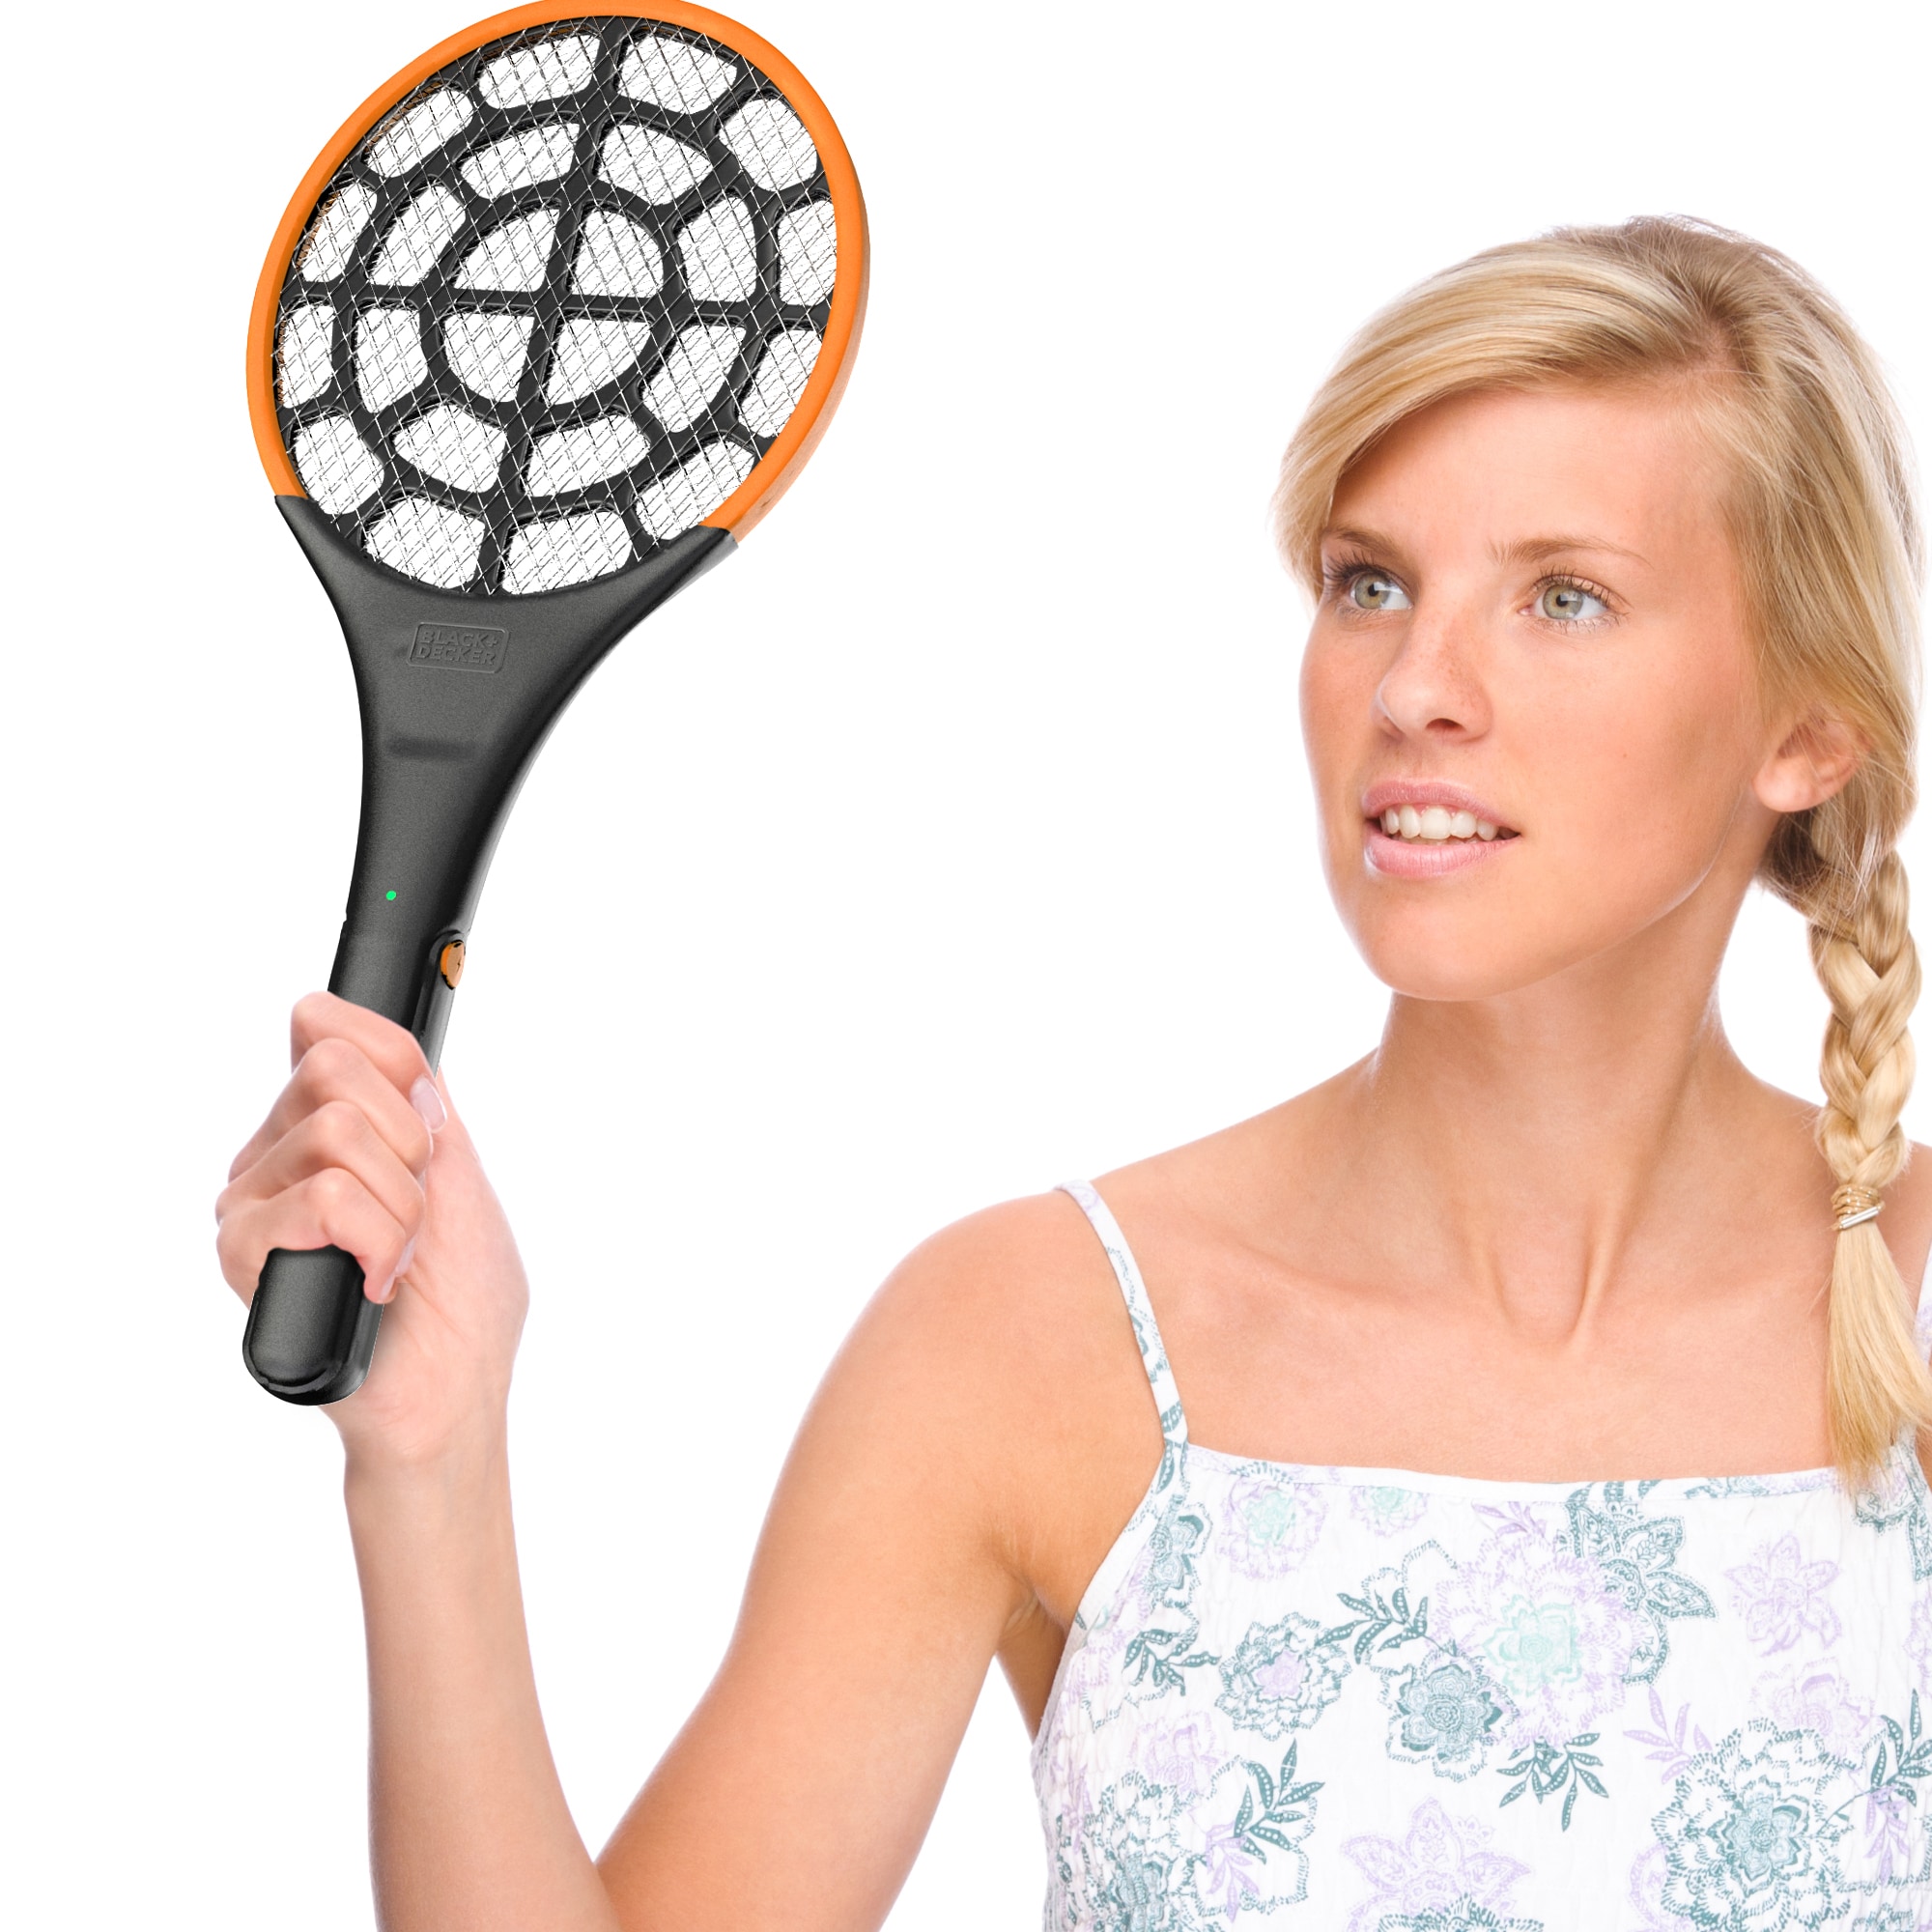 Decker Electric Fly Swatter Large Handheld Indoor & Outdoor Mosquito & Bug Zapper with Battery-Powered Mesh Grid & Heavy-Duty Tennis Racket Design Safe for Humans & Pets Non-Toxic Black 